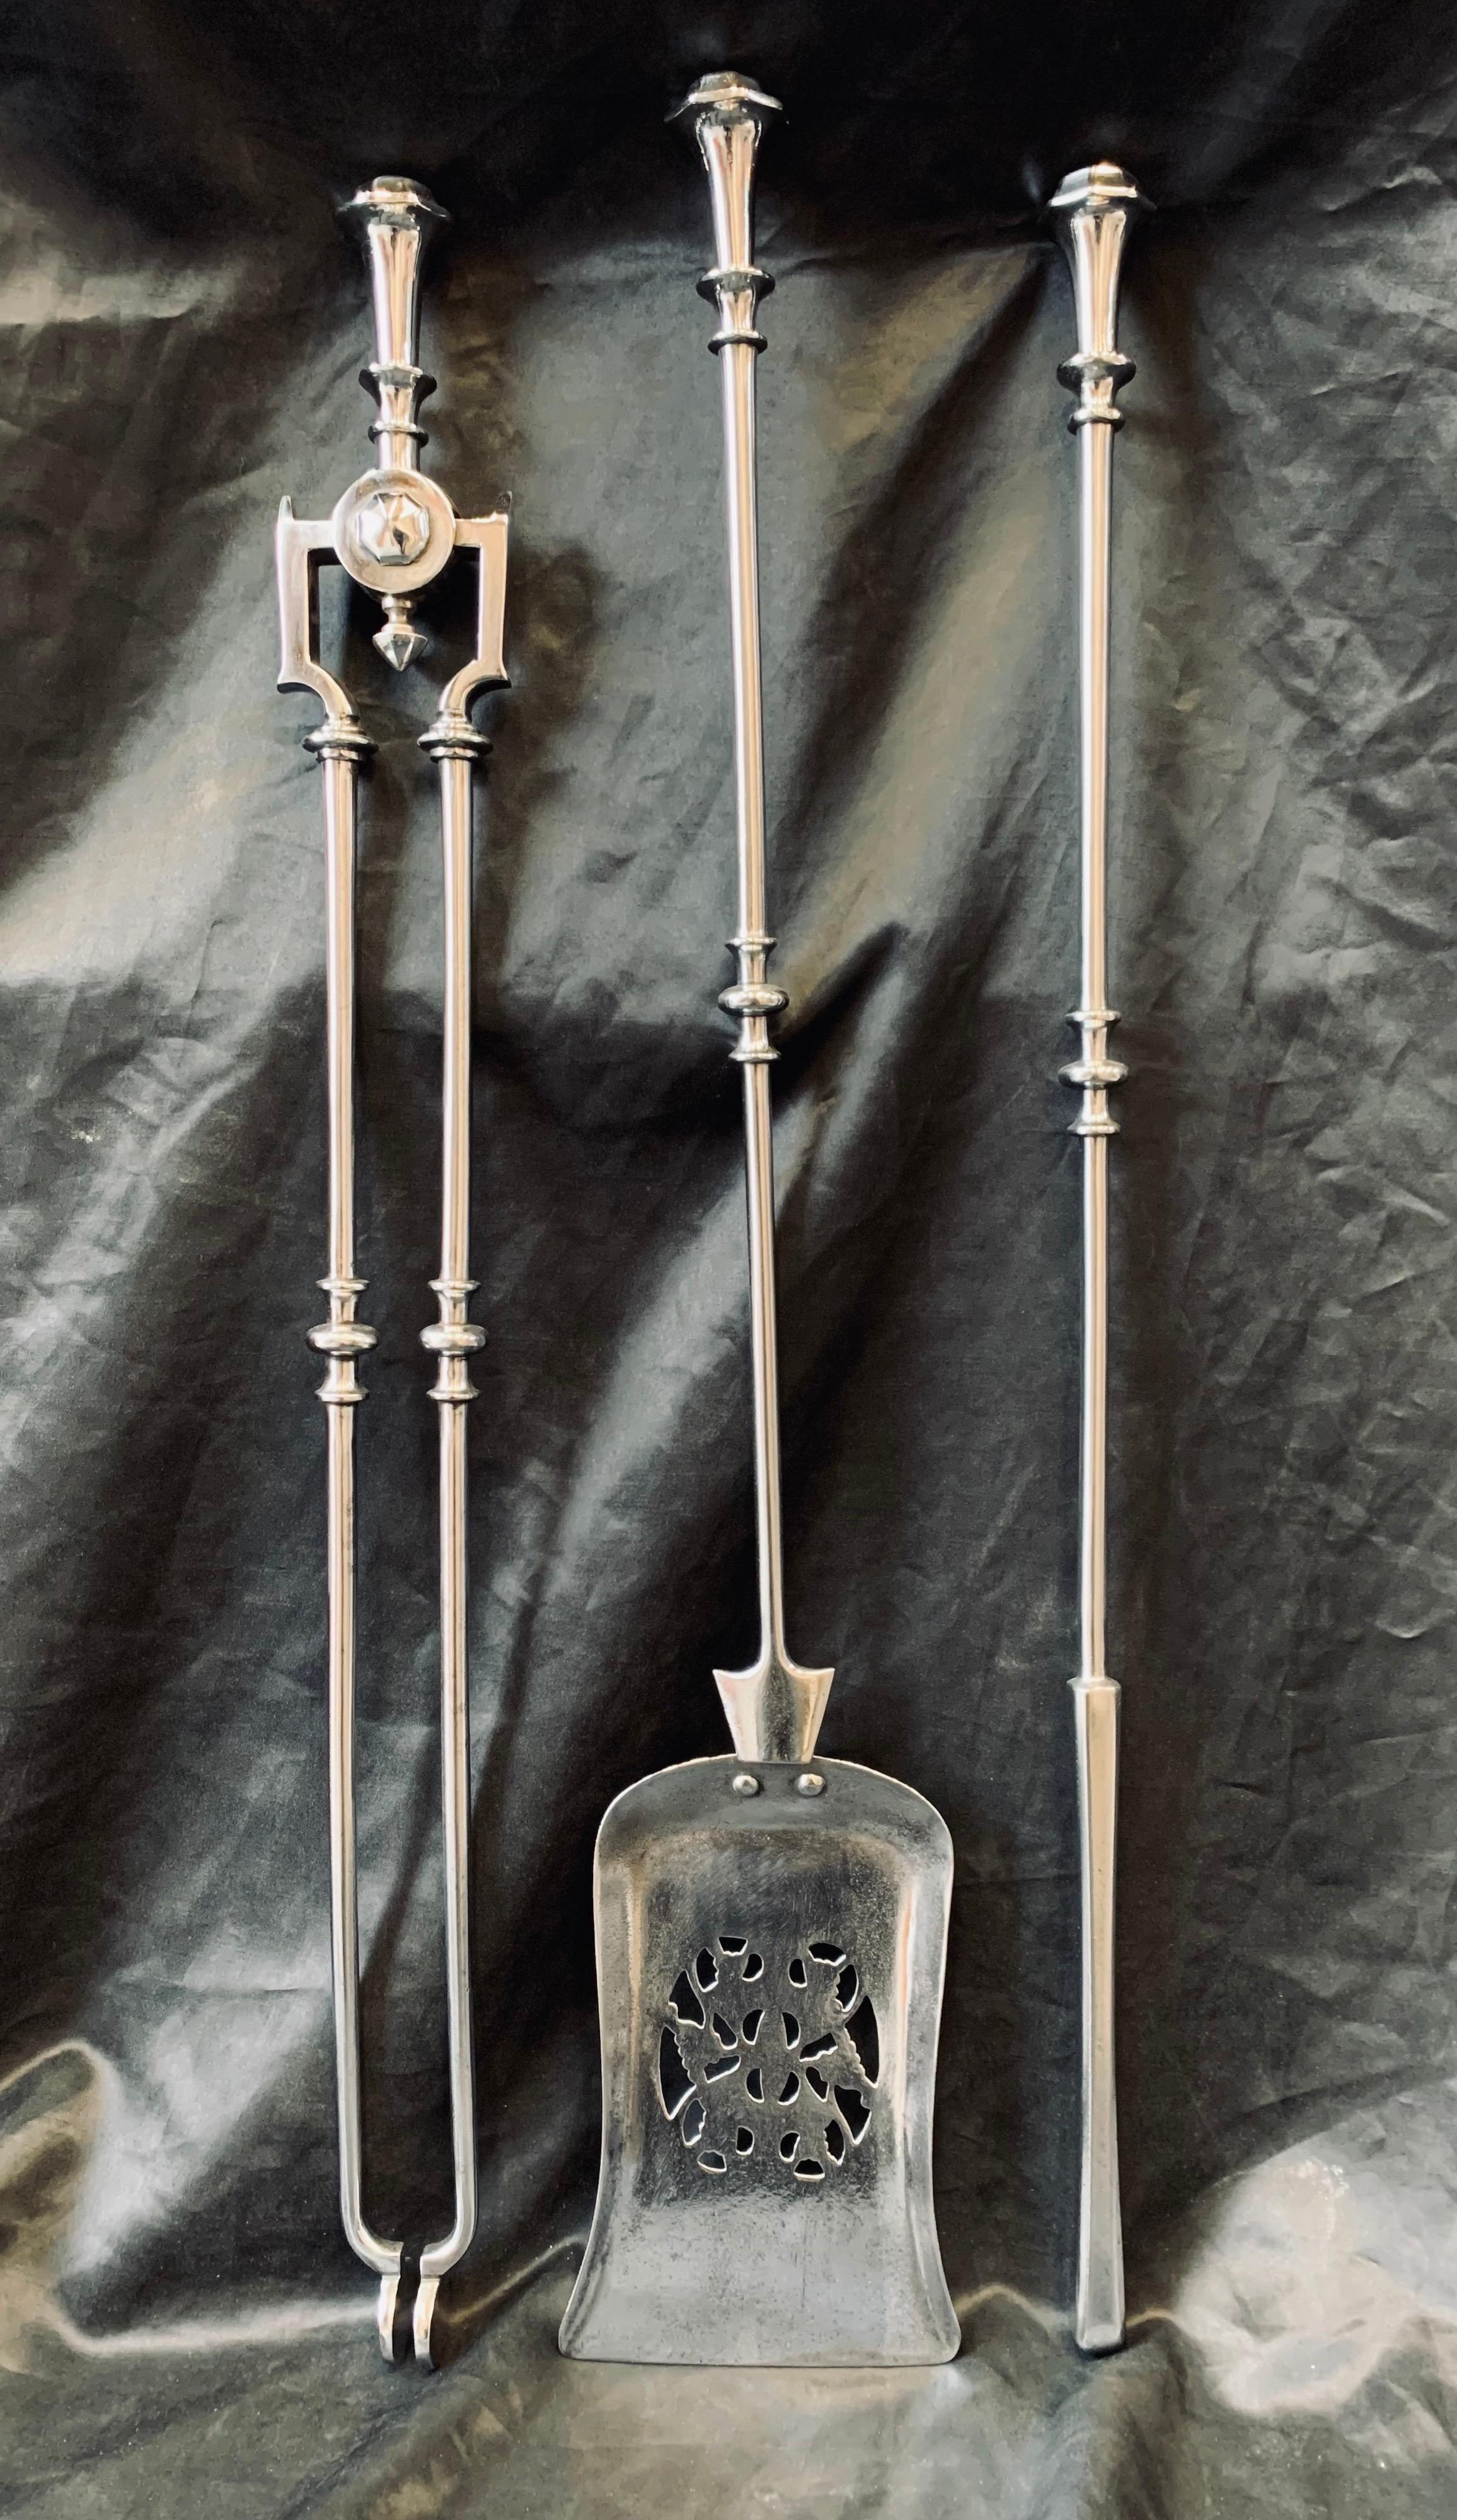 A charming set of Scottish Georgian 19th century polished steel fire iron tools. These comprise of a poker, shovel and a set of tongs. A hexagonal finial top, with a tapered polished spindle with bobbin and ball detail, the shovel blade is